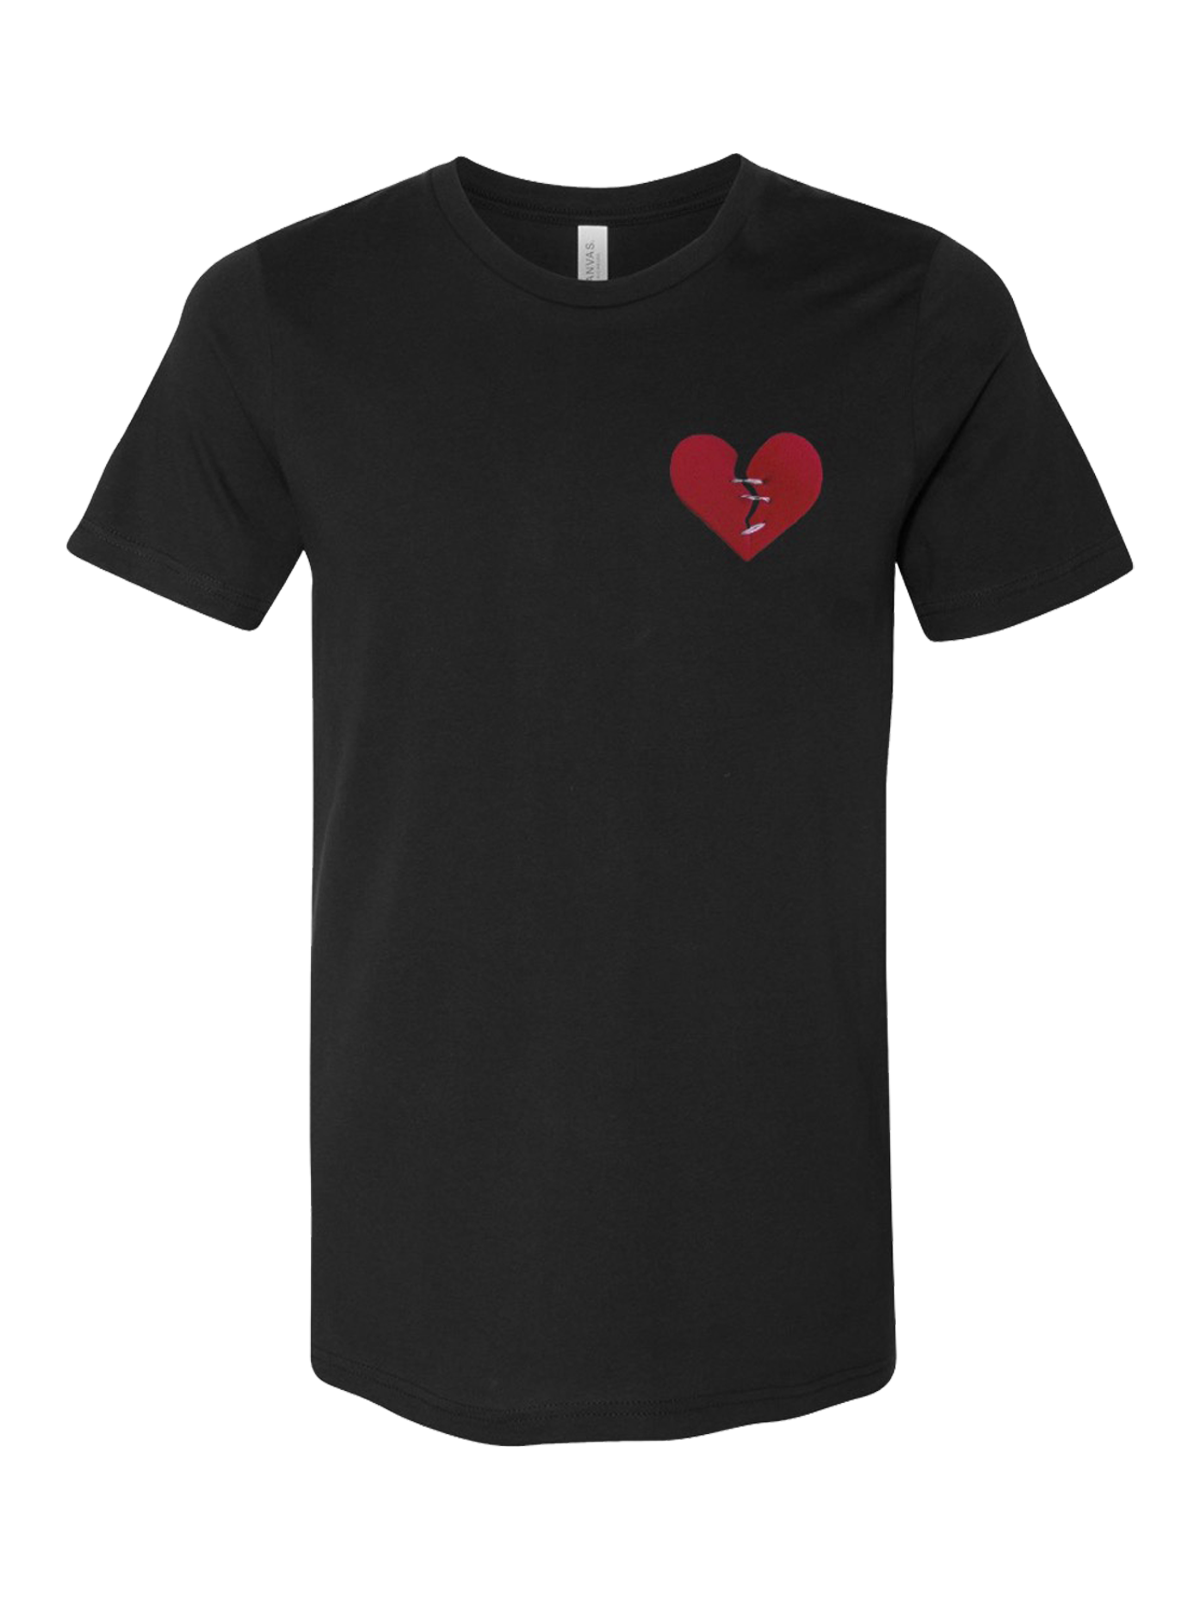 Stitched heart black tee front Carly Pearce